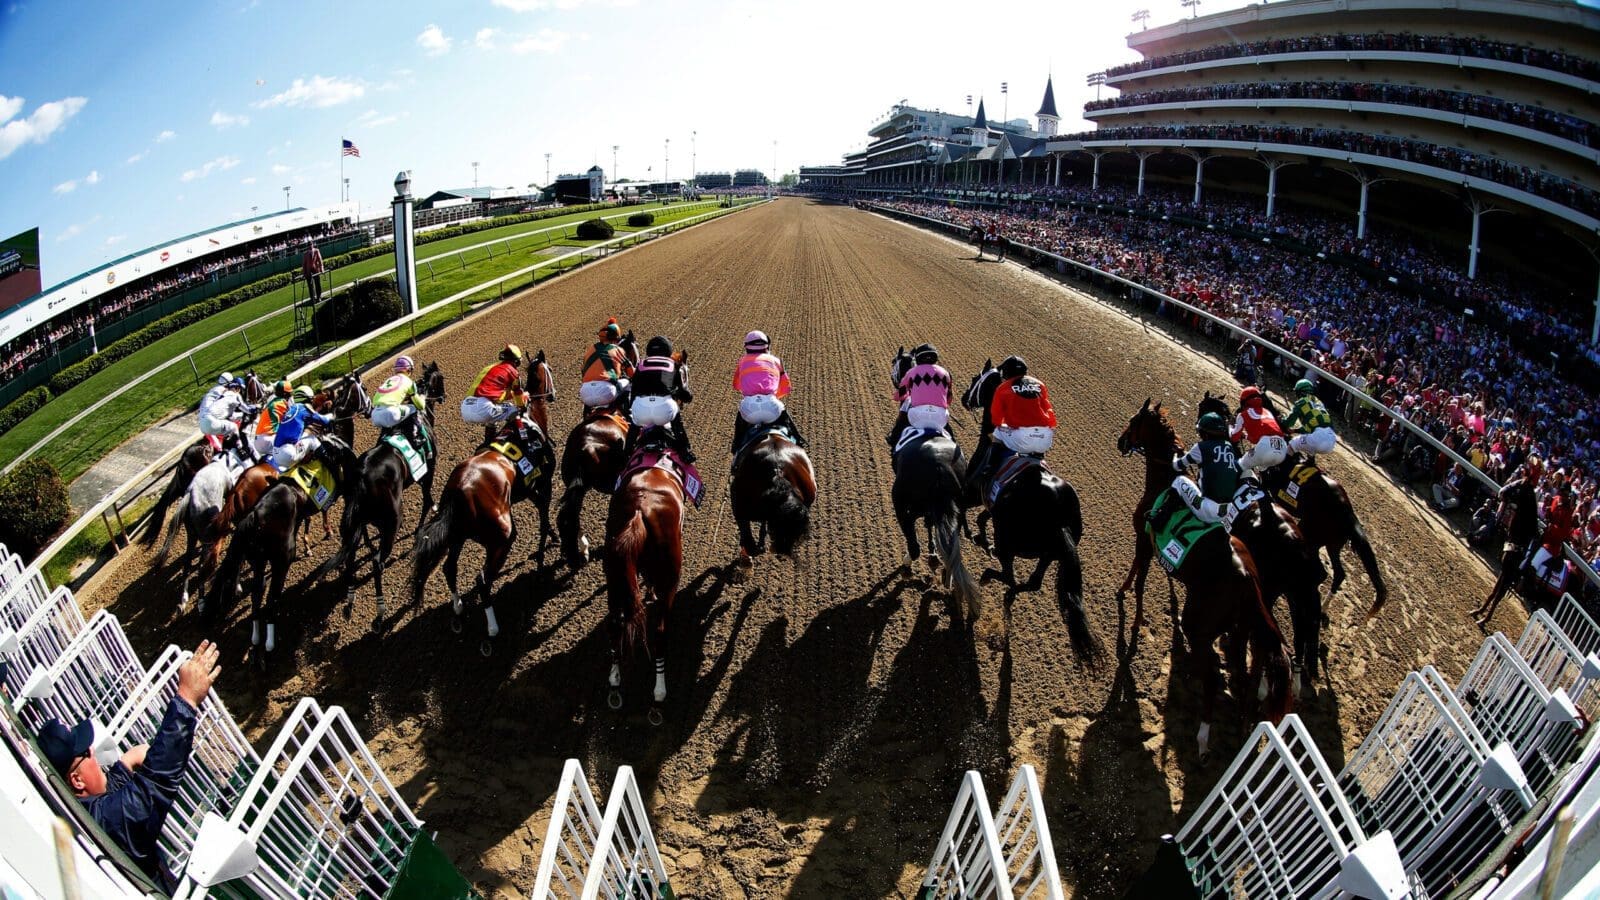 us horse racing churchill downs kentucky oaks breeders cup scaled